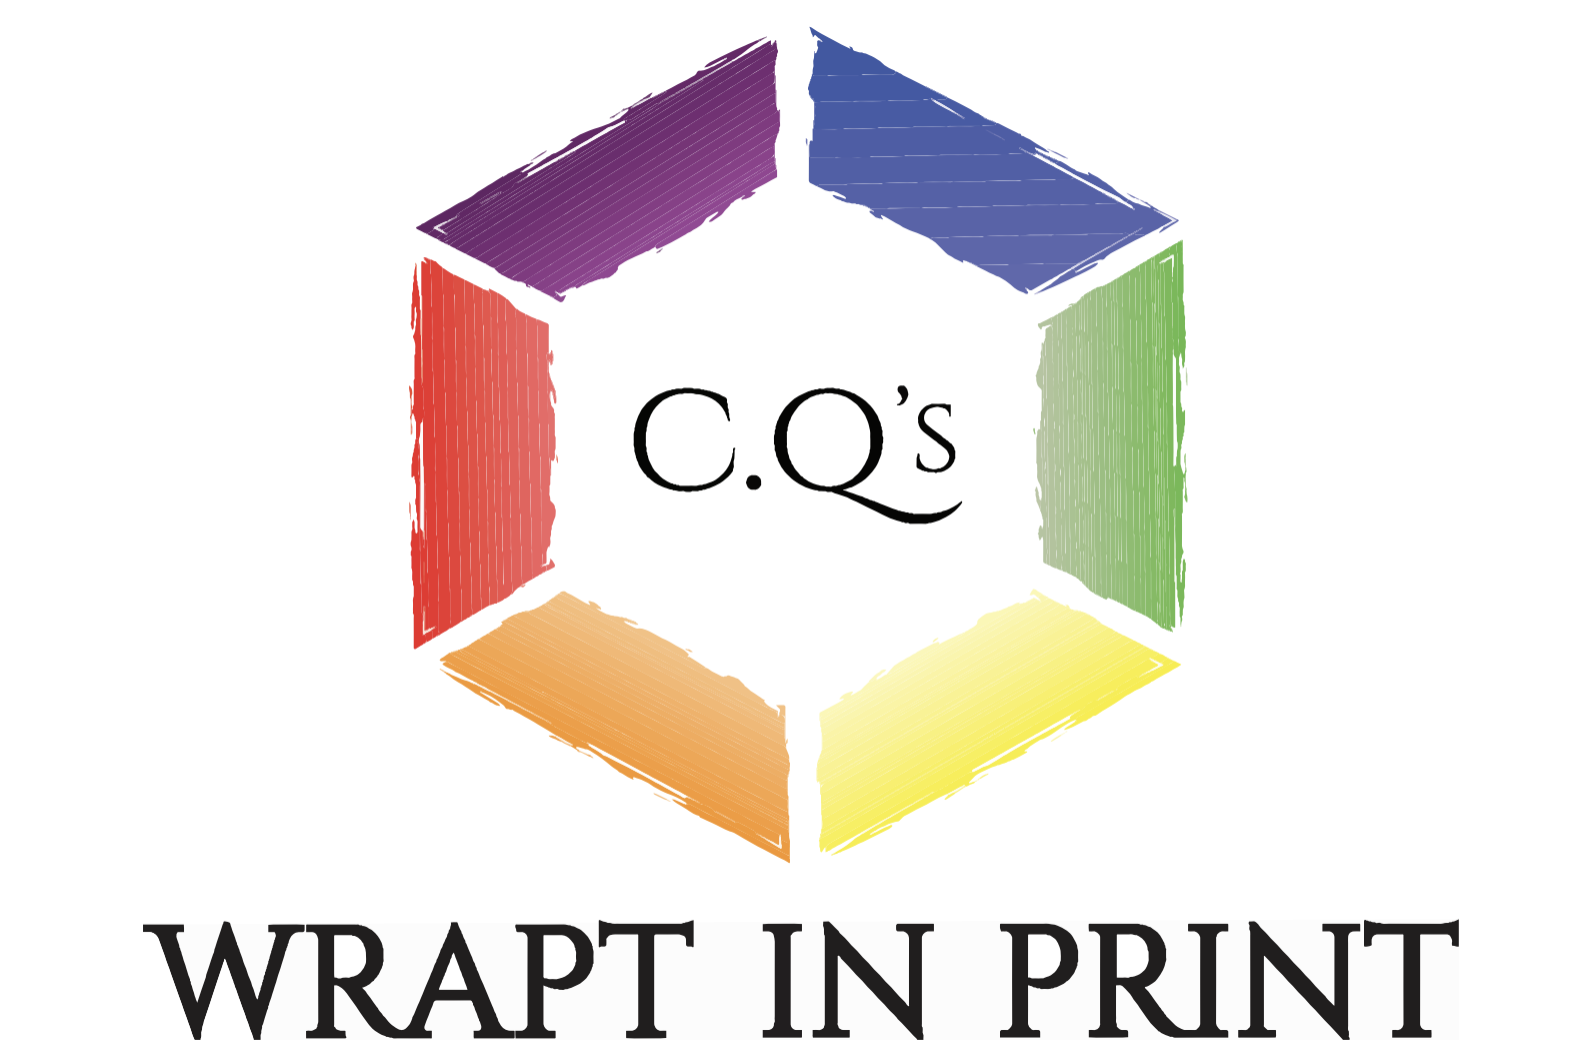 Wrapt in Print logo - Links back to Home page